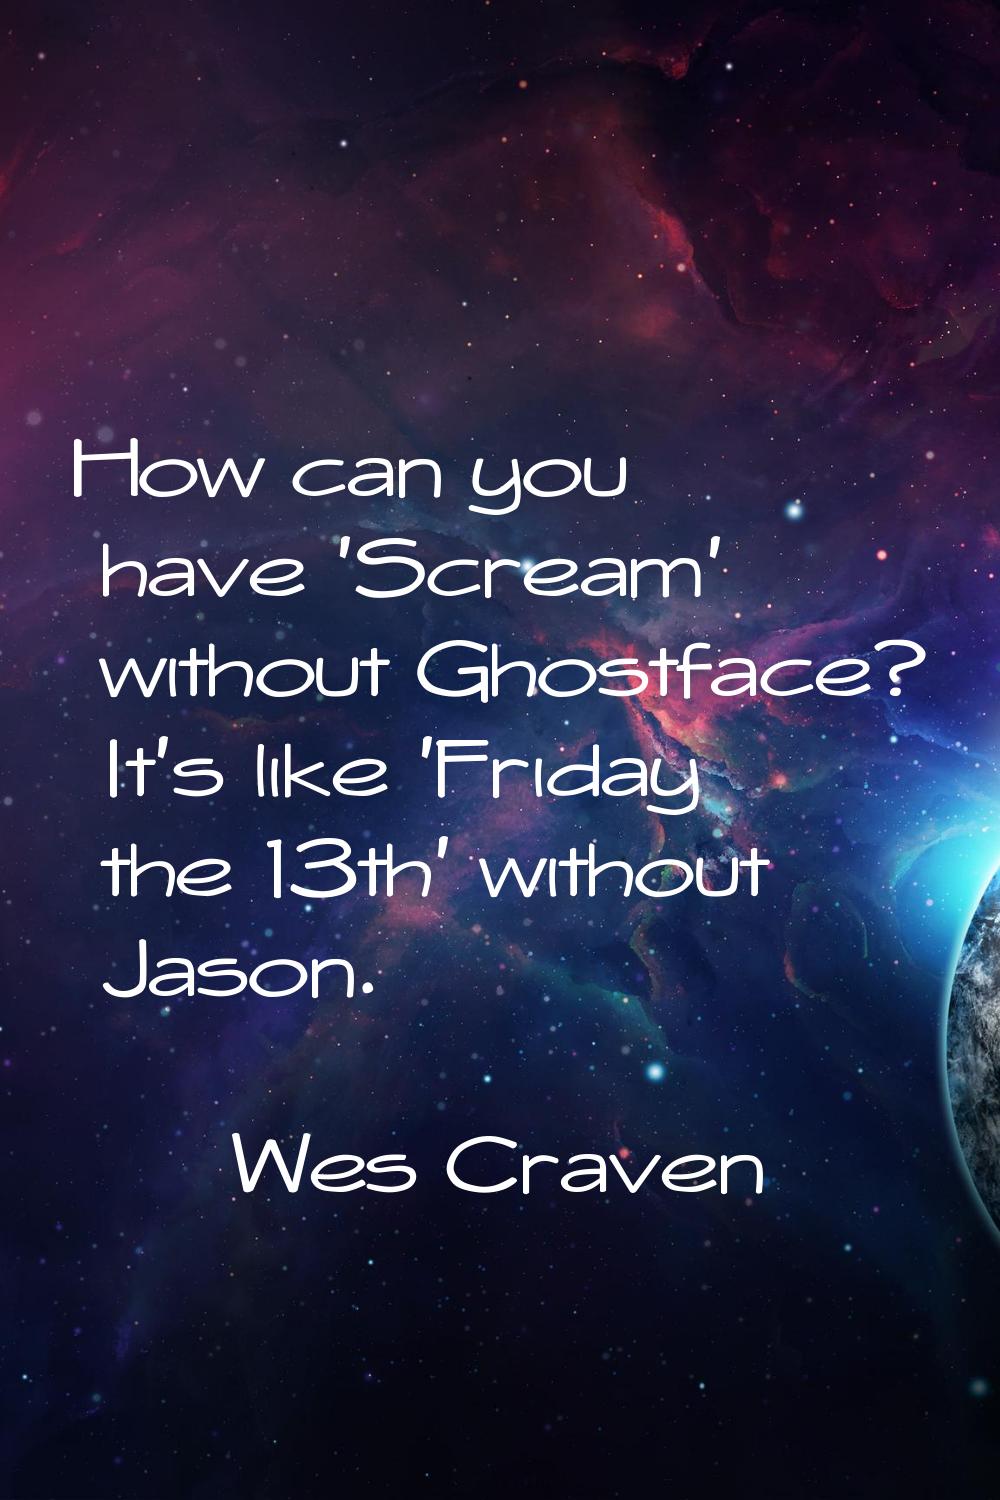 How can you have 'Scream' without Ghostface? It's like 'Friday the 13th' without Jason.